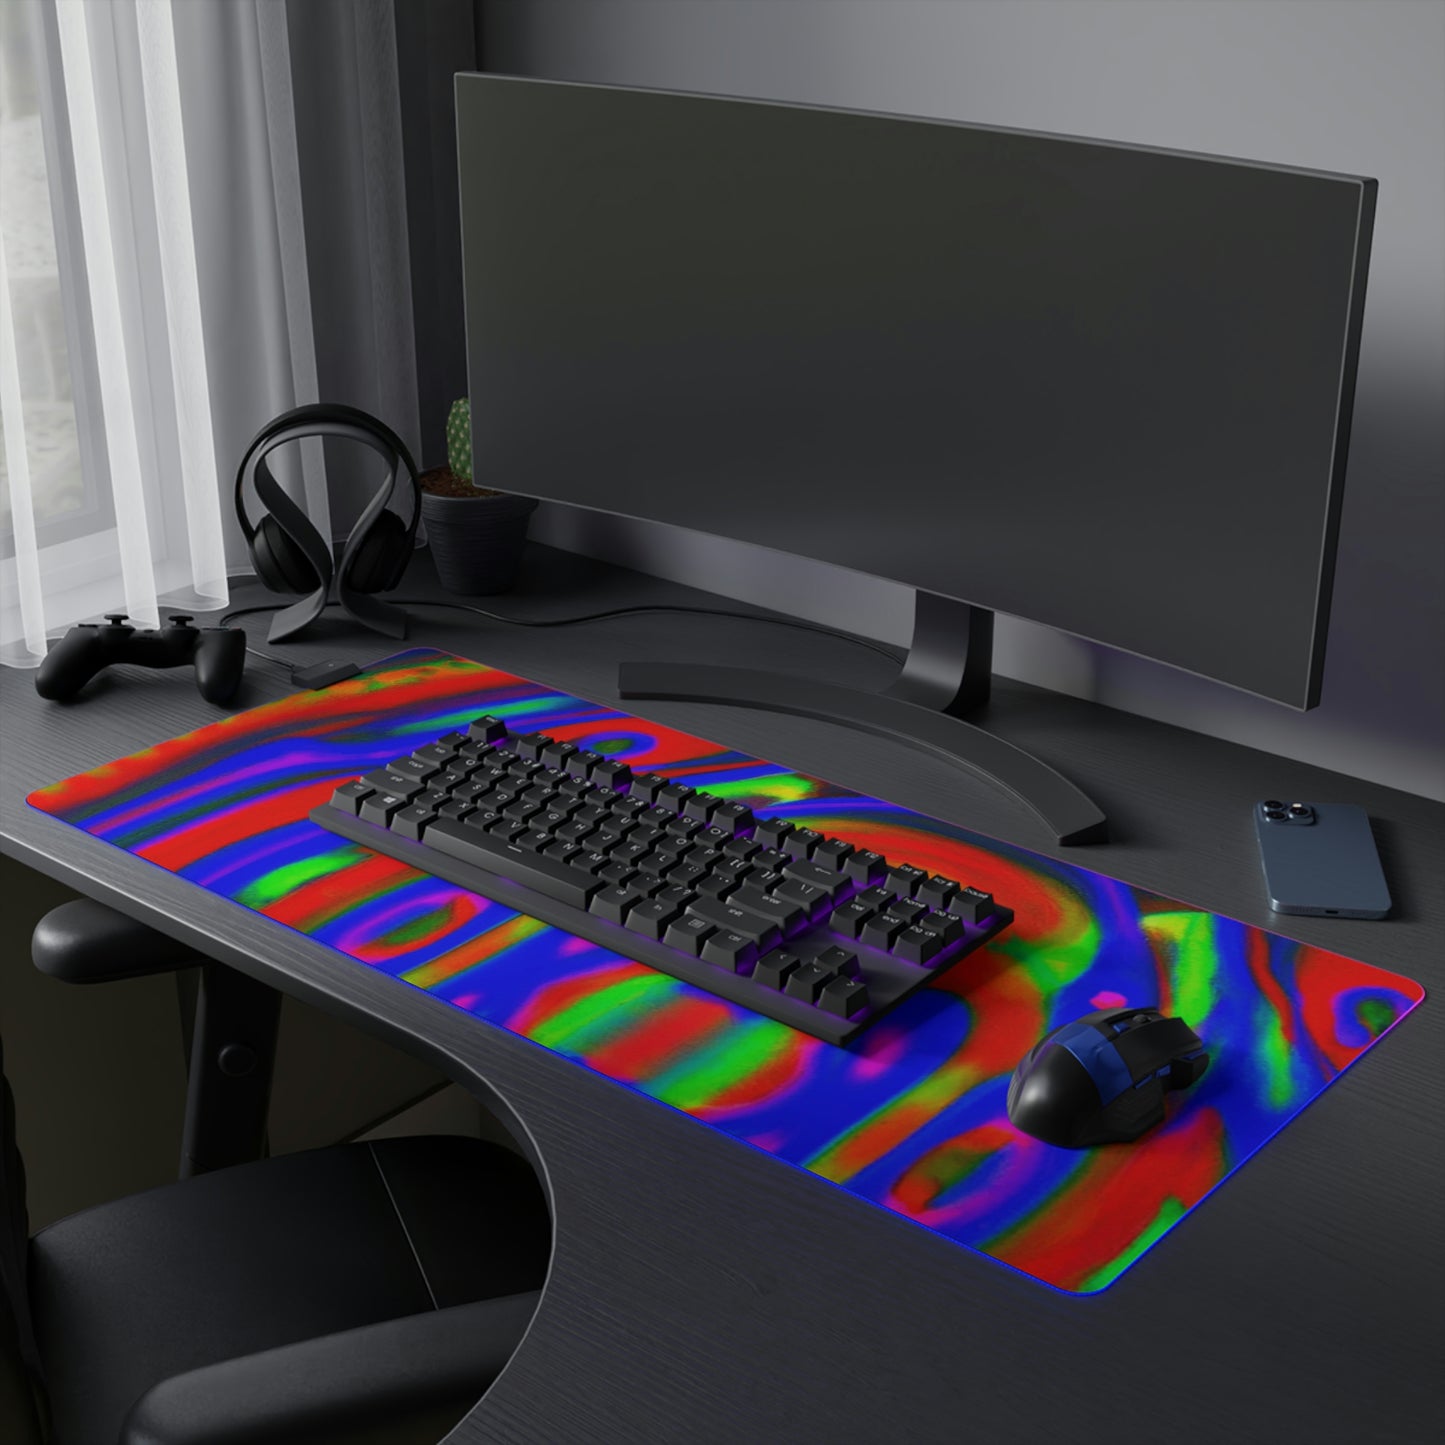 Rocky Ripplewood - Psychedelic Trippy LED Light Up Gaming Mouse Pad